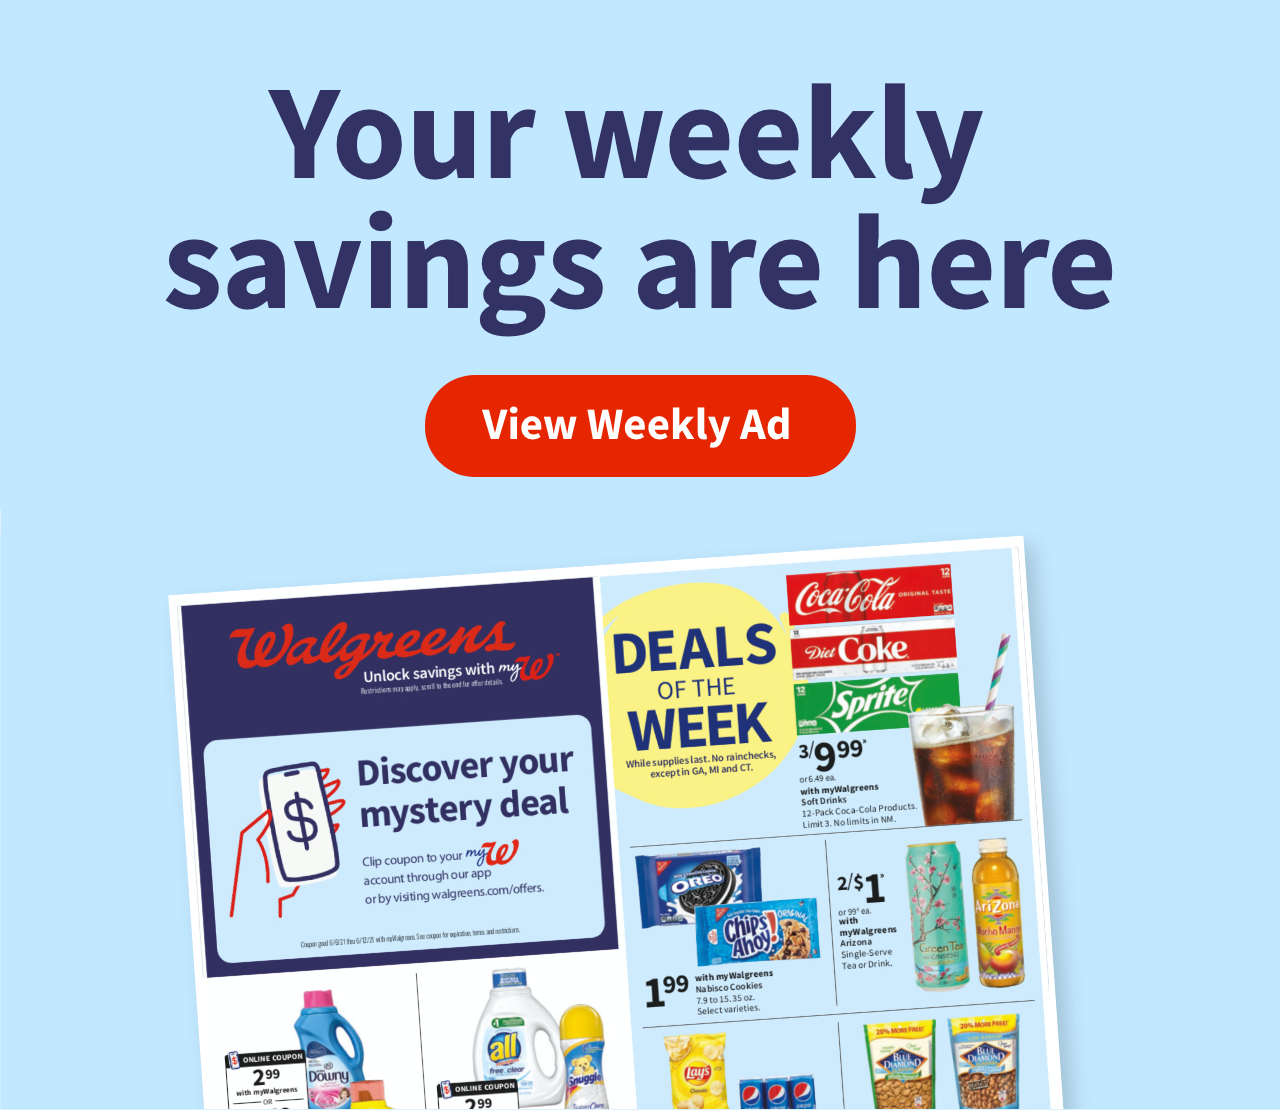 Your weekly savings are here. View Weekly Ad.